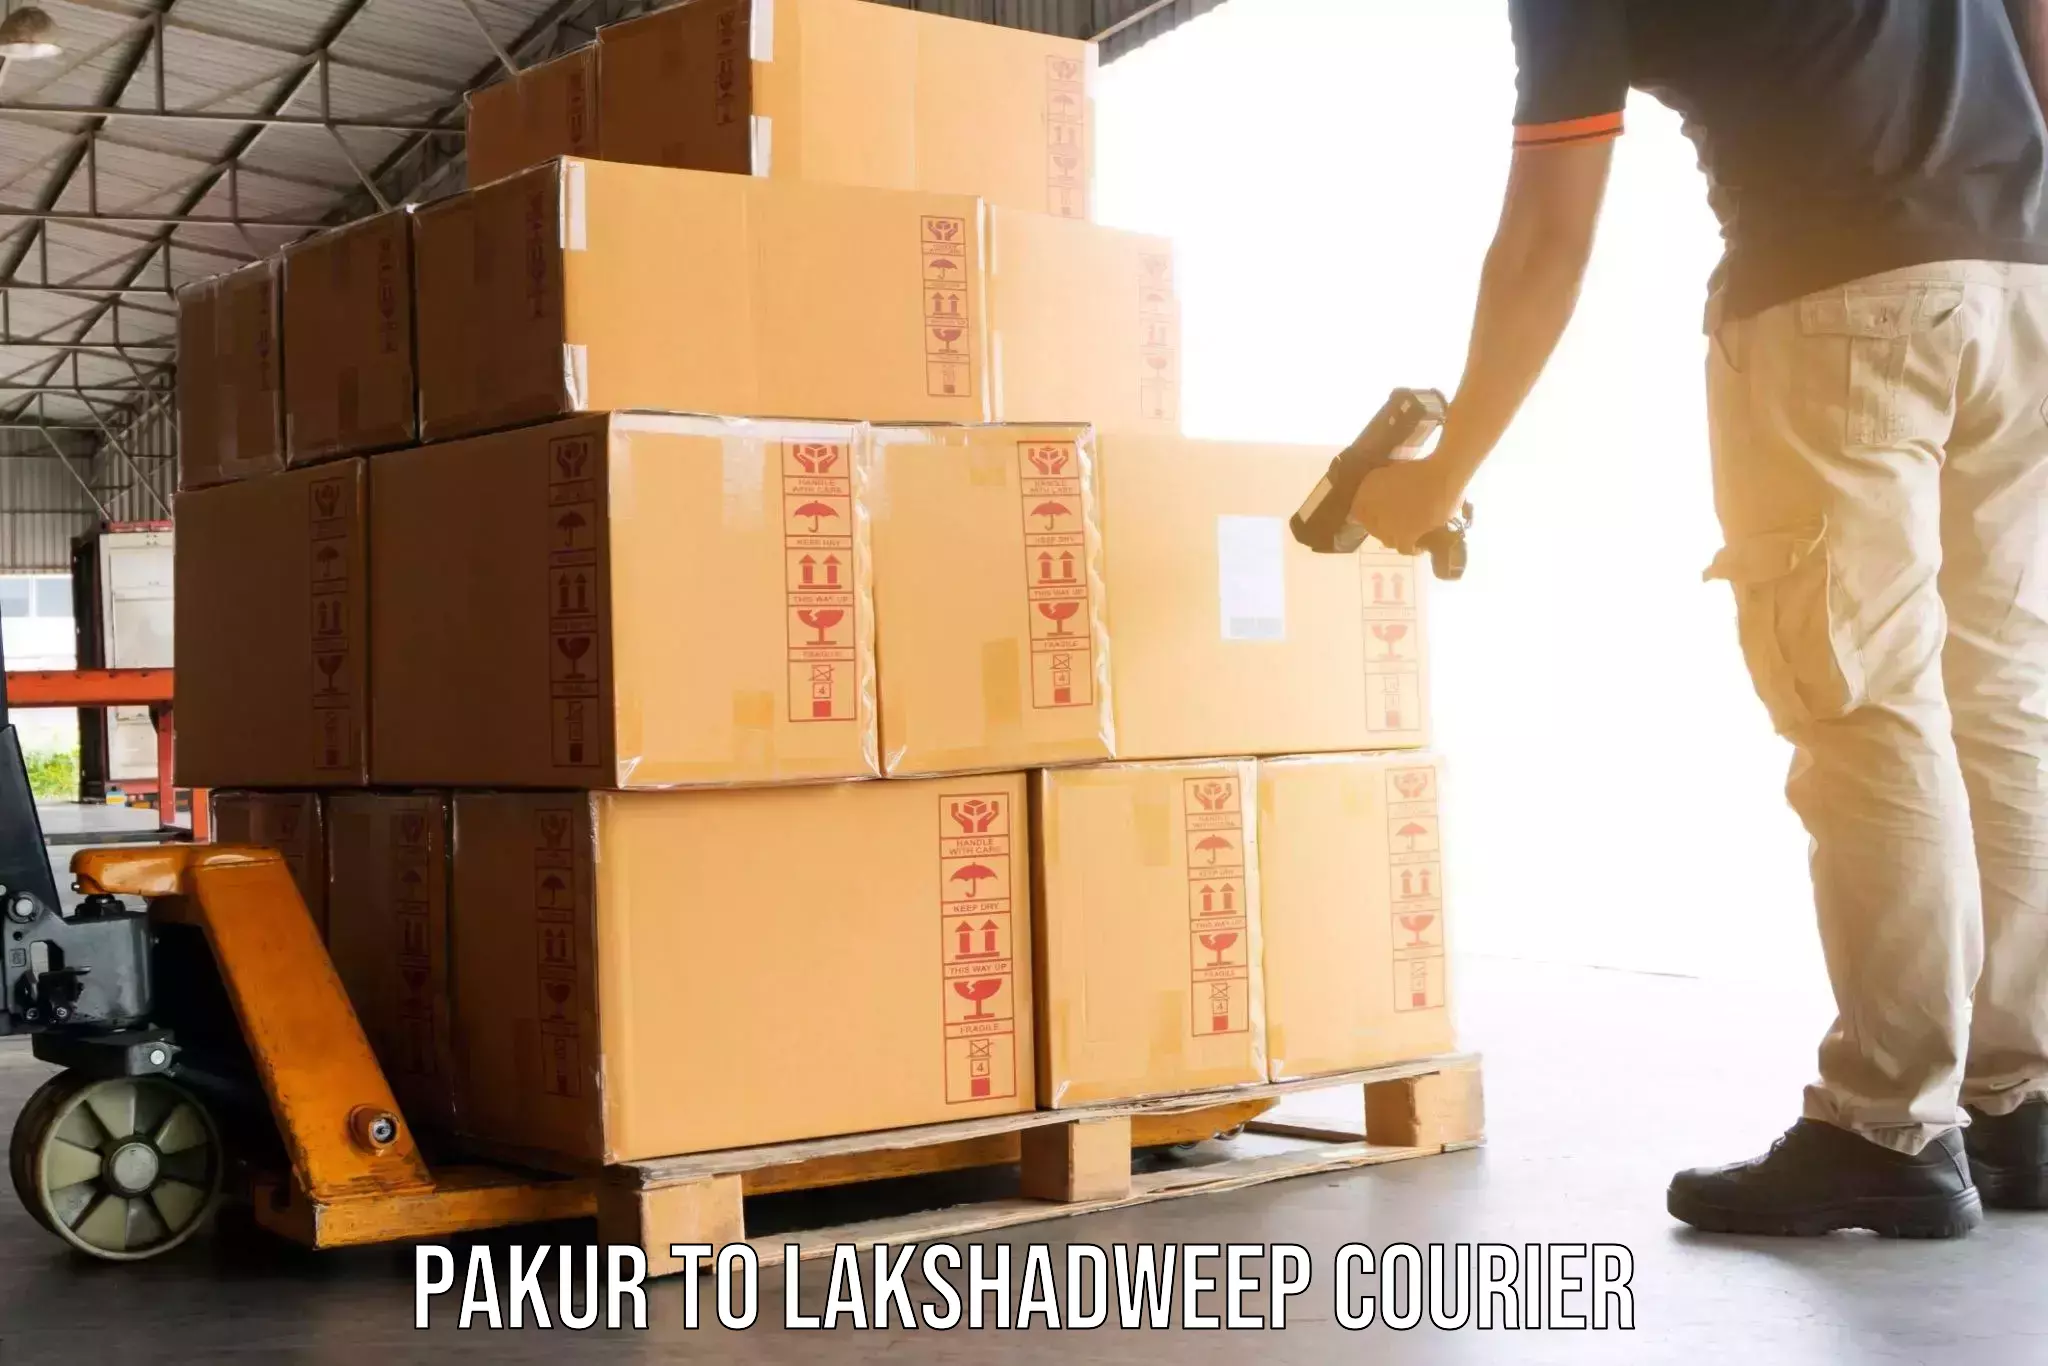 Trusted relocation experts Pakur to Lakshadweep